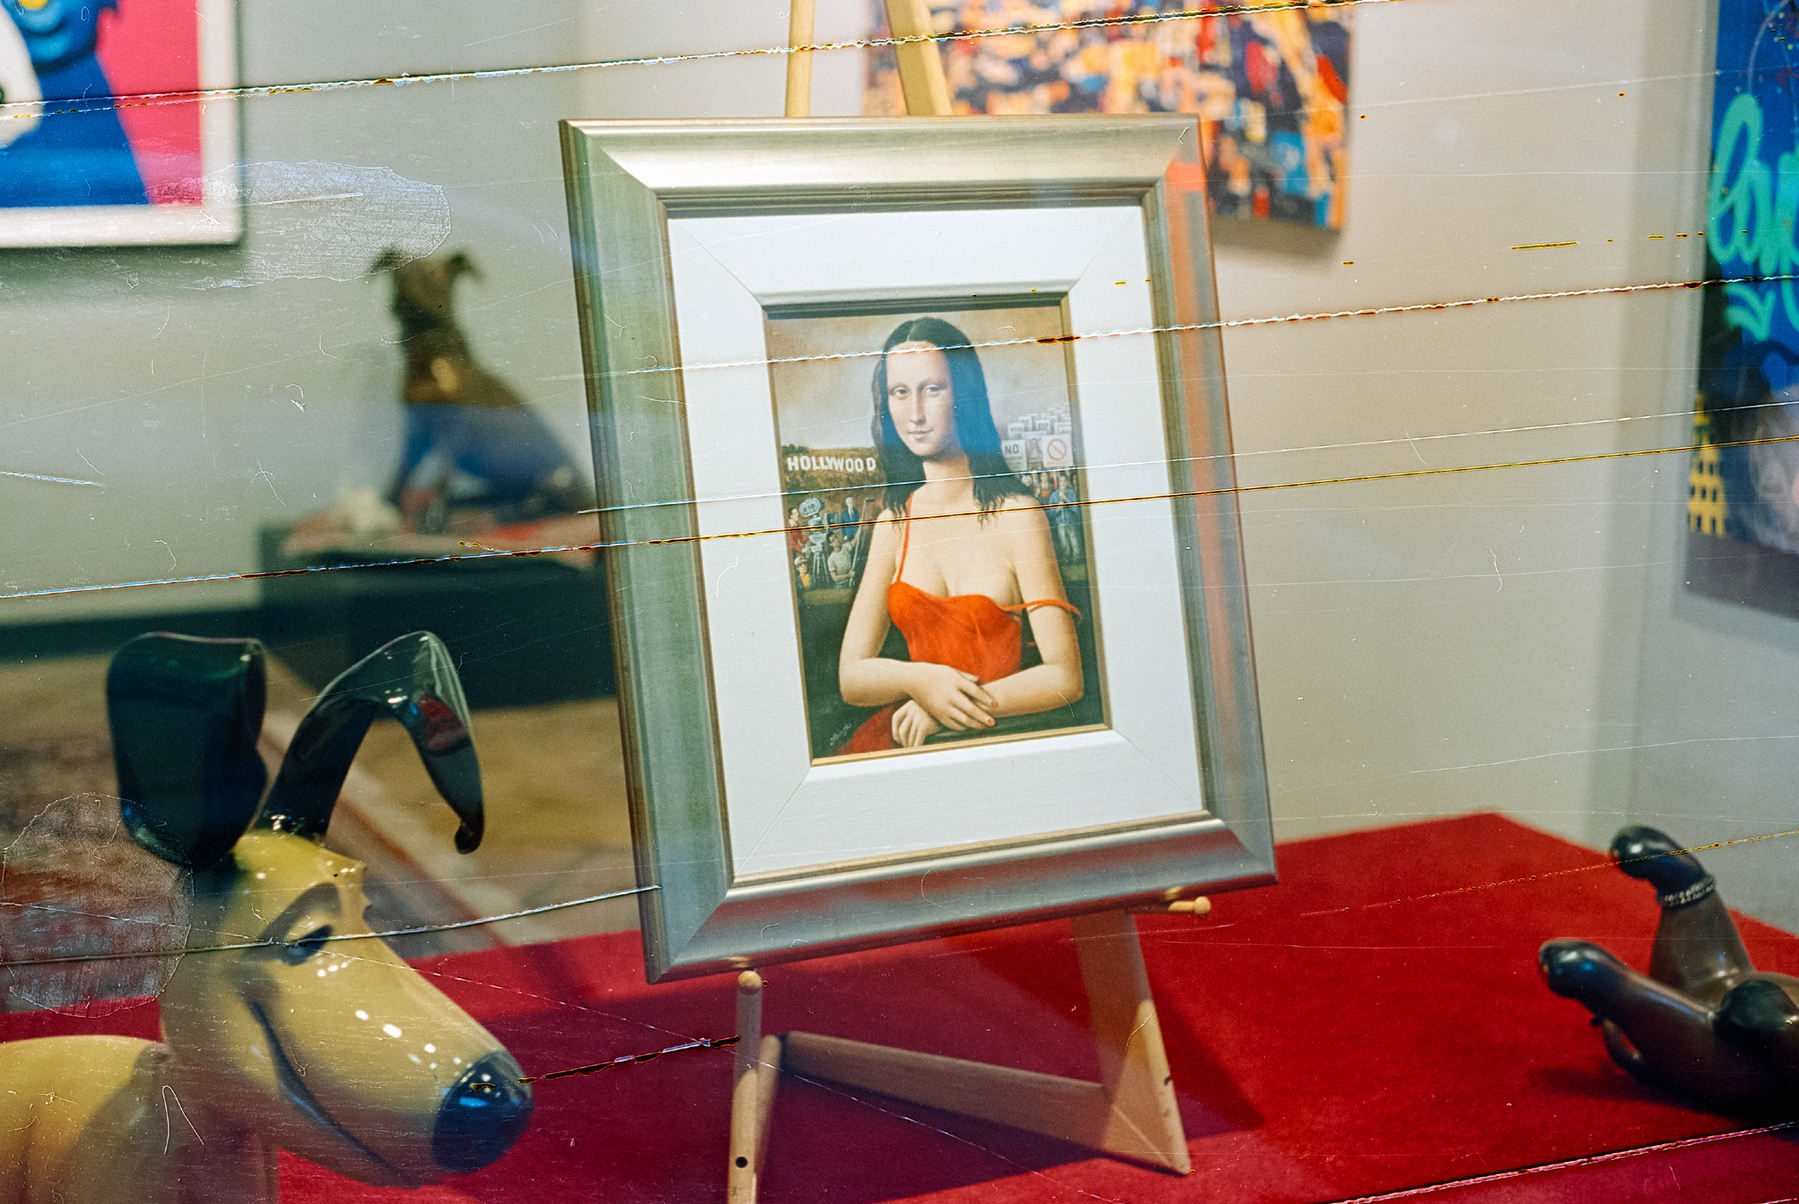 a scan of a color photograph that shows a spoof of a mona lisa image at an art gallery. the mona lisa here is wearing modern clothing. the film negative has scratches across the entire frame